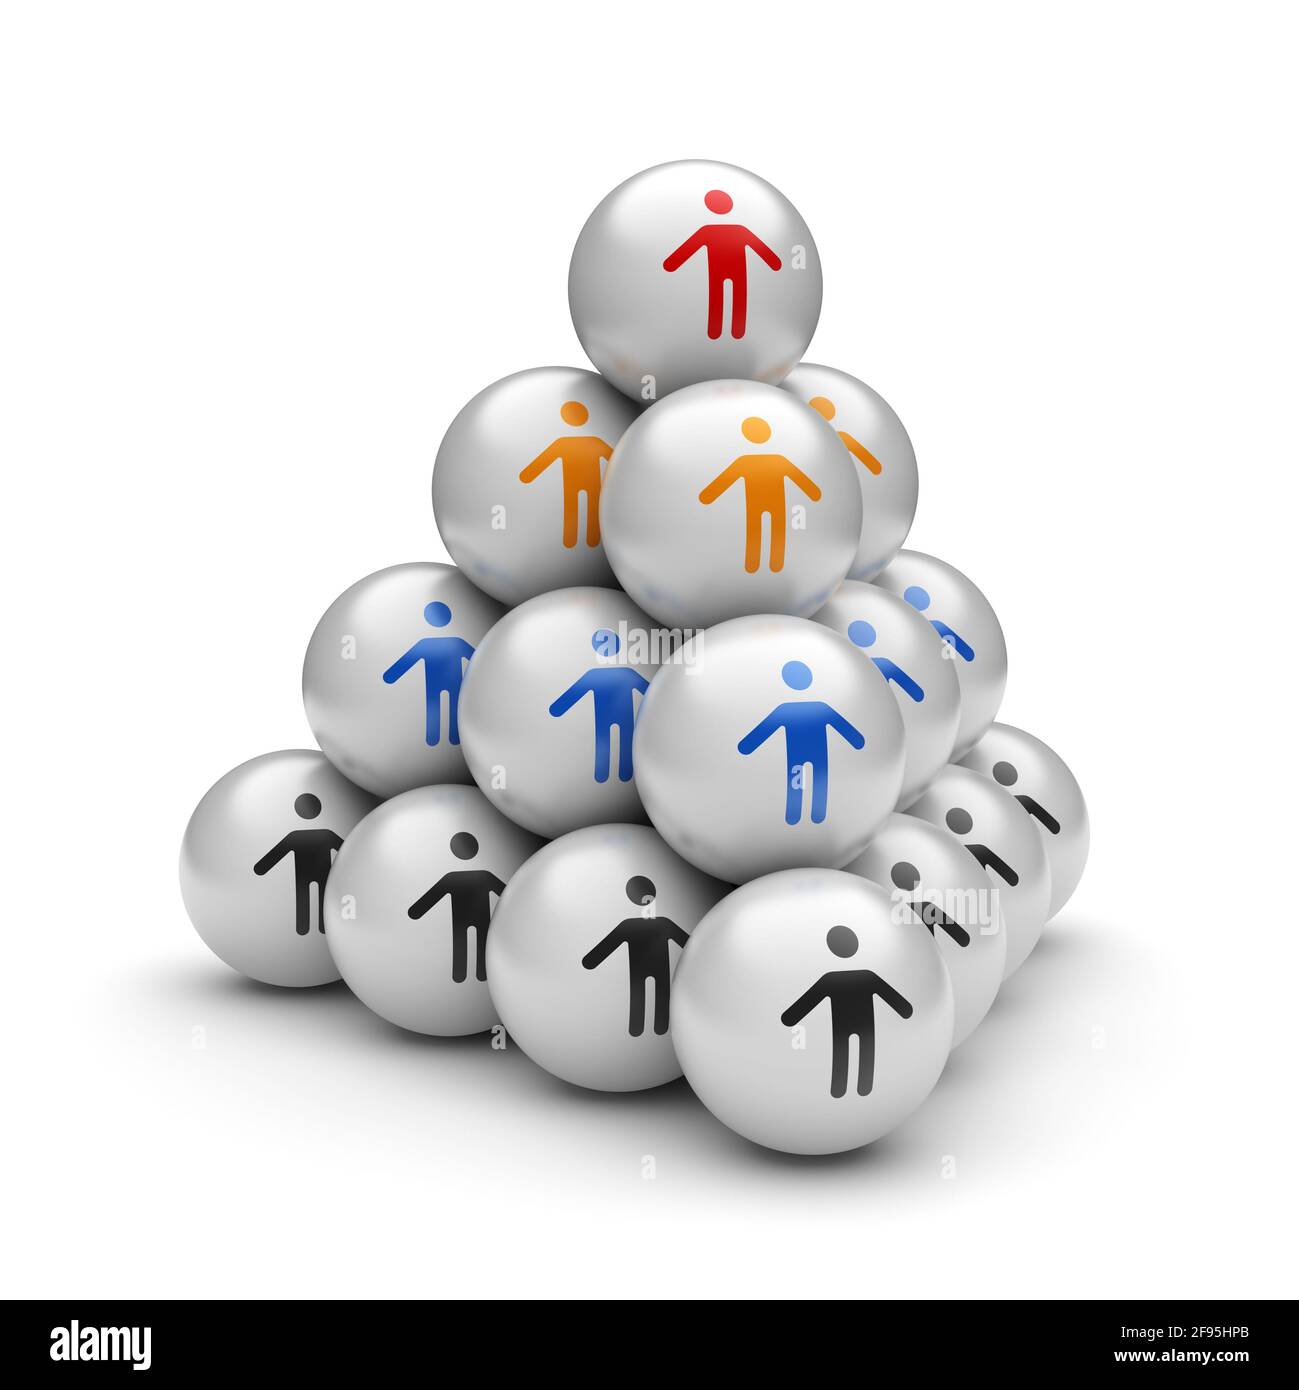 Business concept of the hierarchy structure pyramid and the leader of the team on its top. 3d illustration Stock Photo